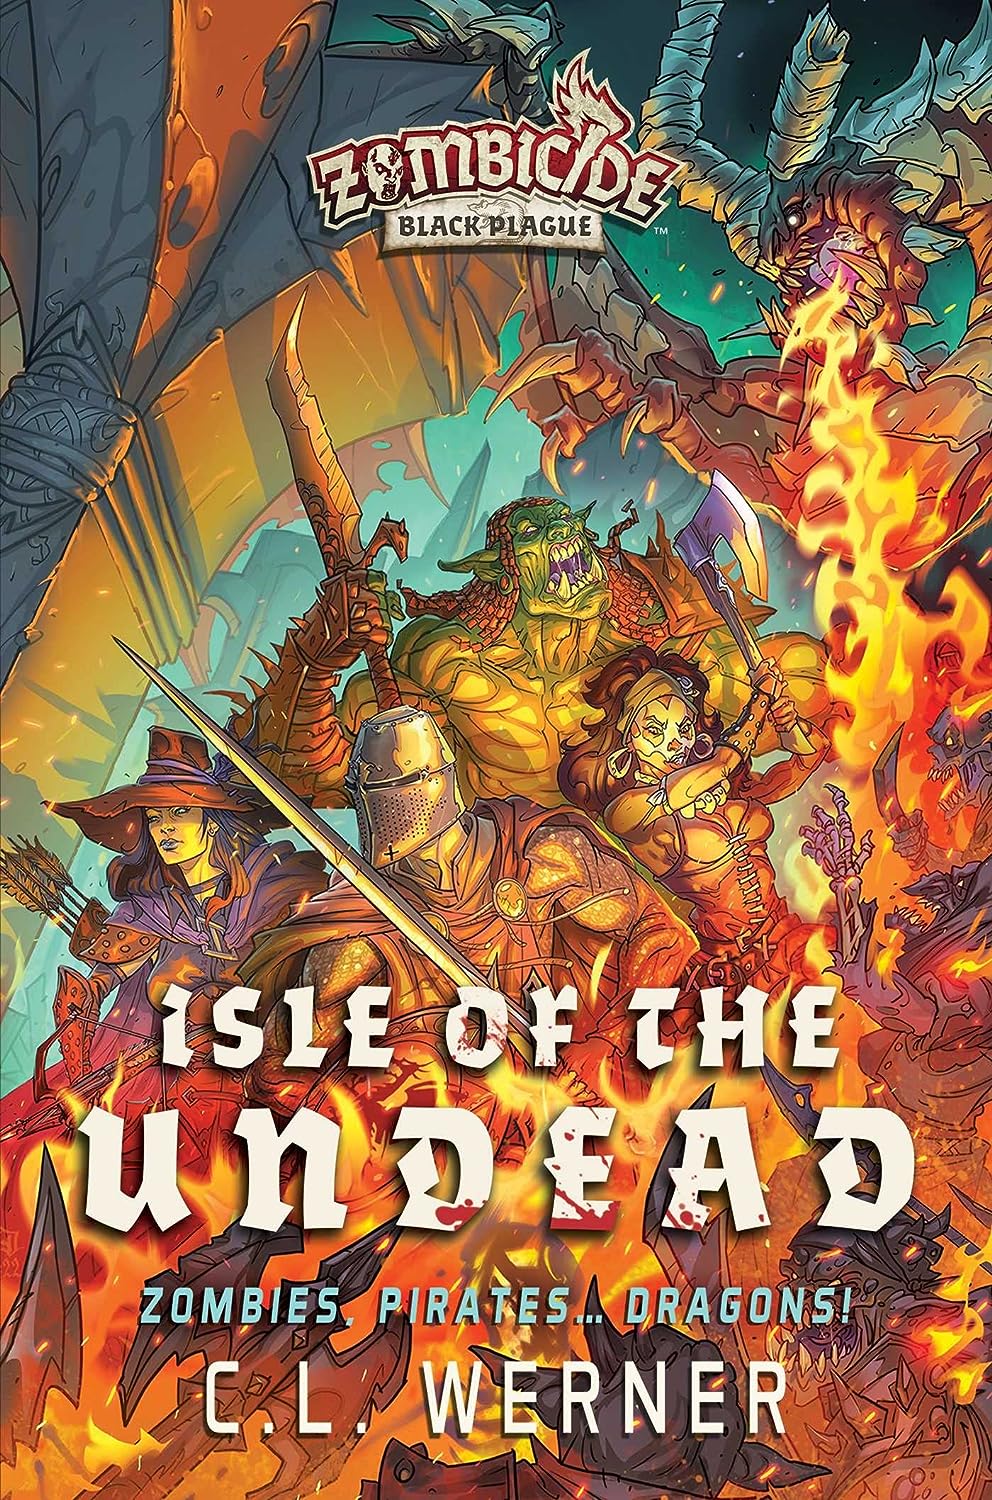 Zombicide: Black Plague - Isle of the Undead Book